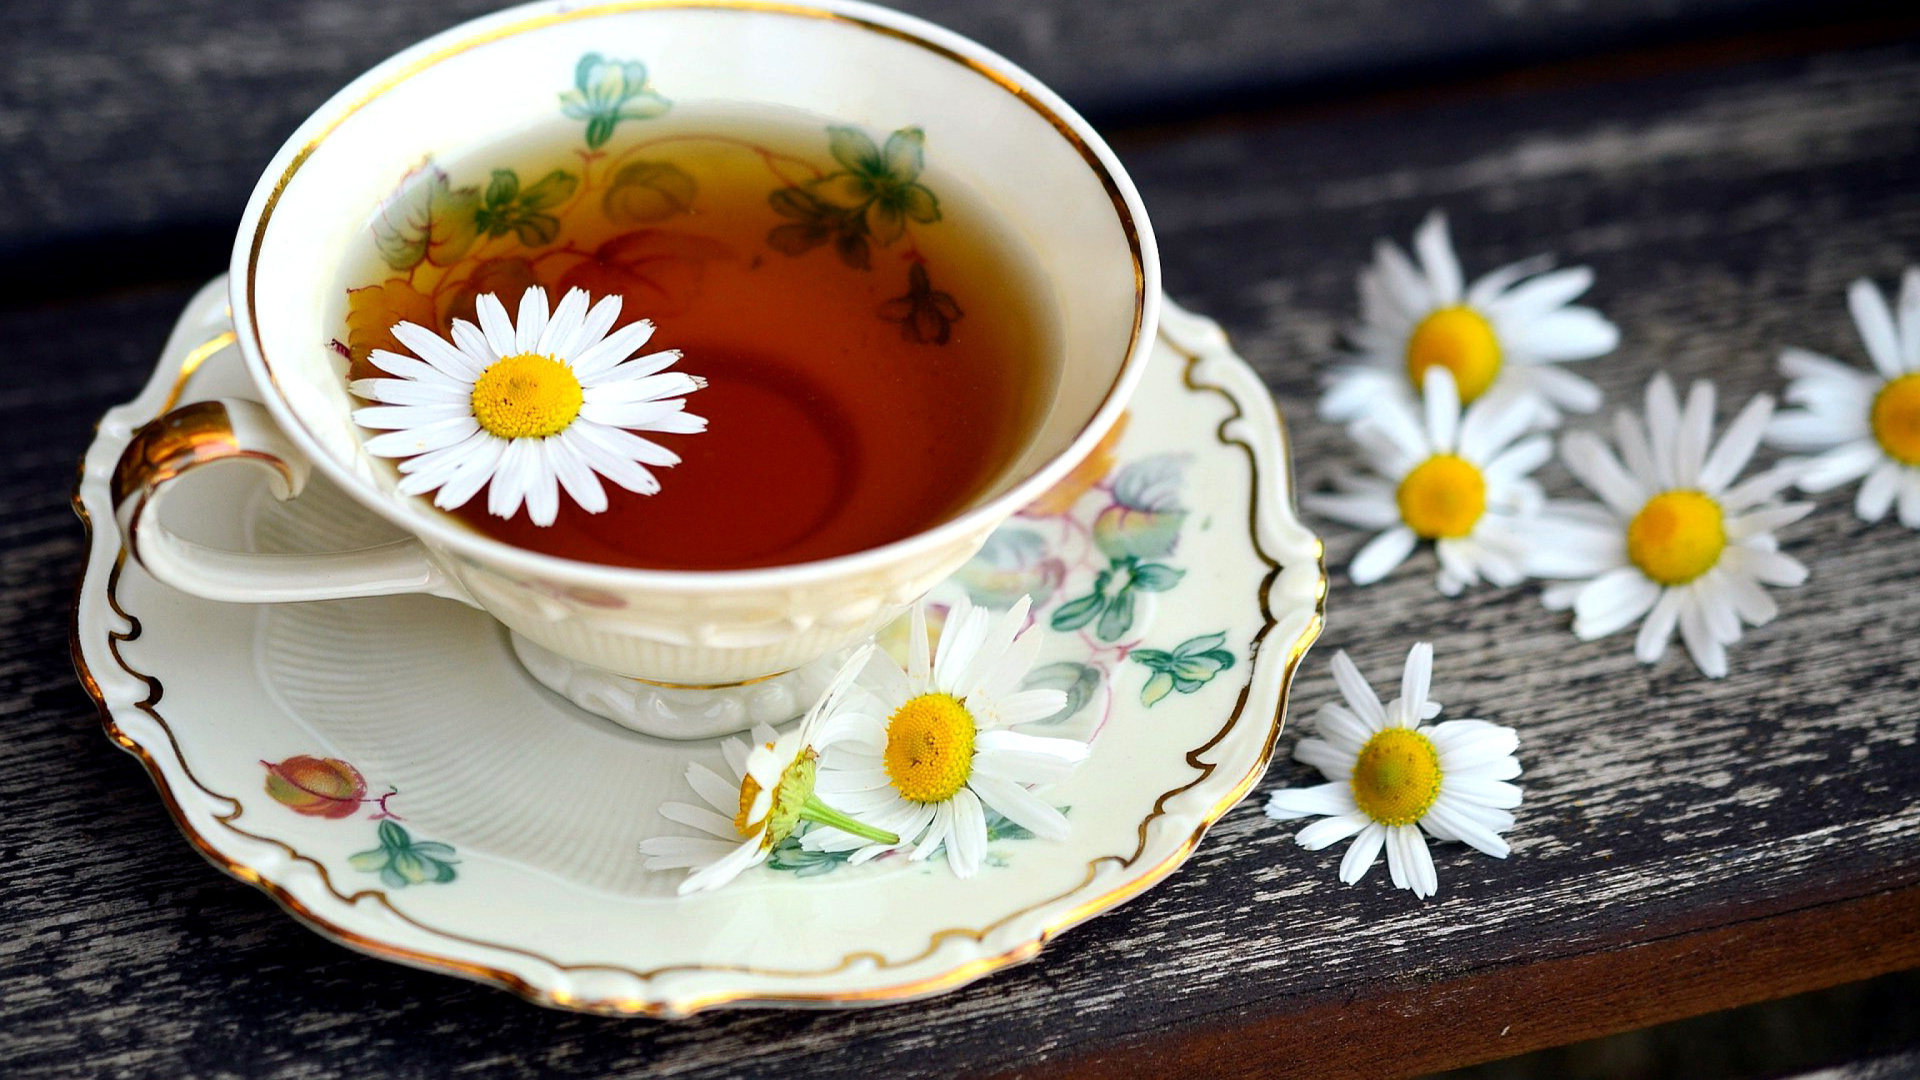 Tea with daisies wallpaper 1920x1080